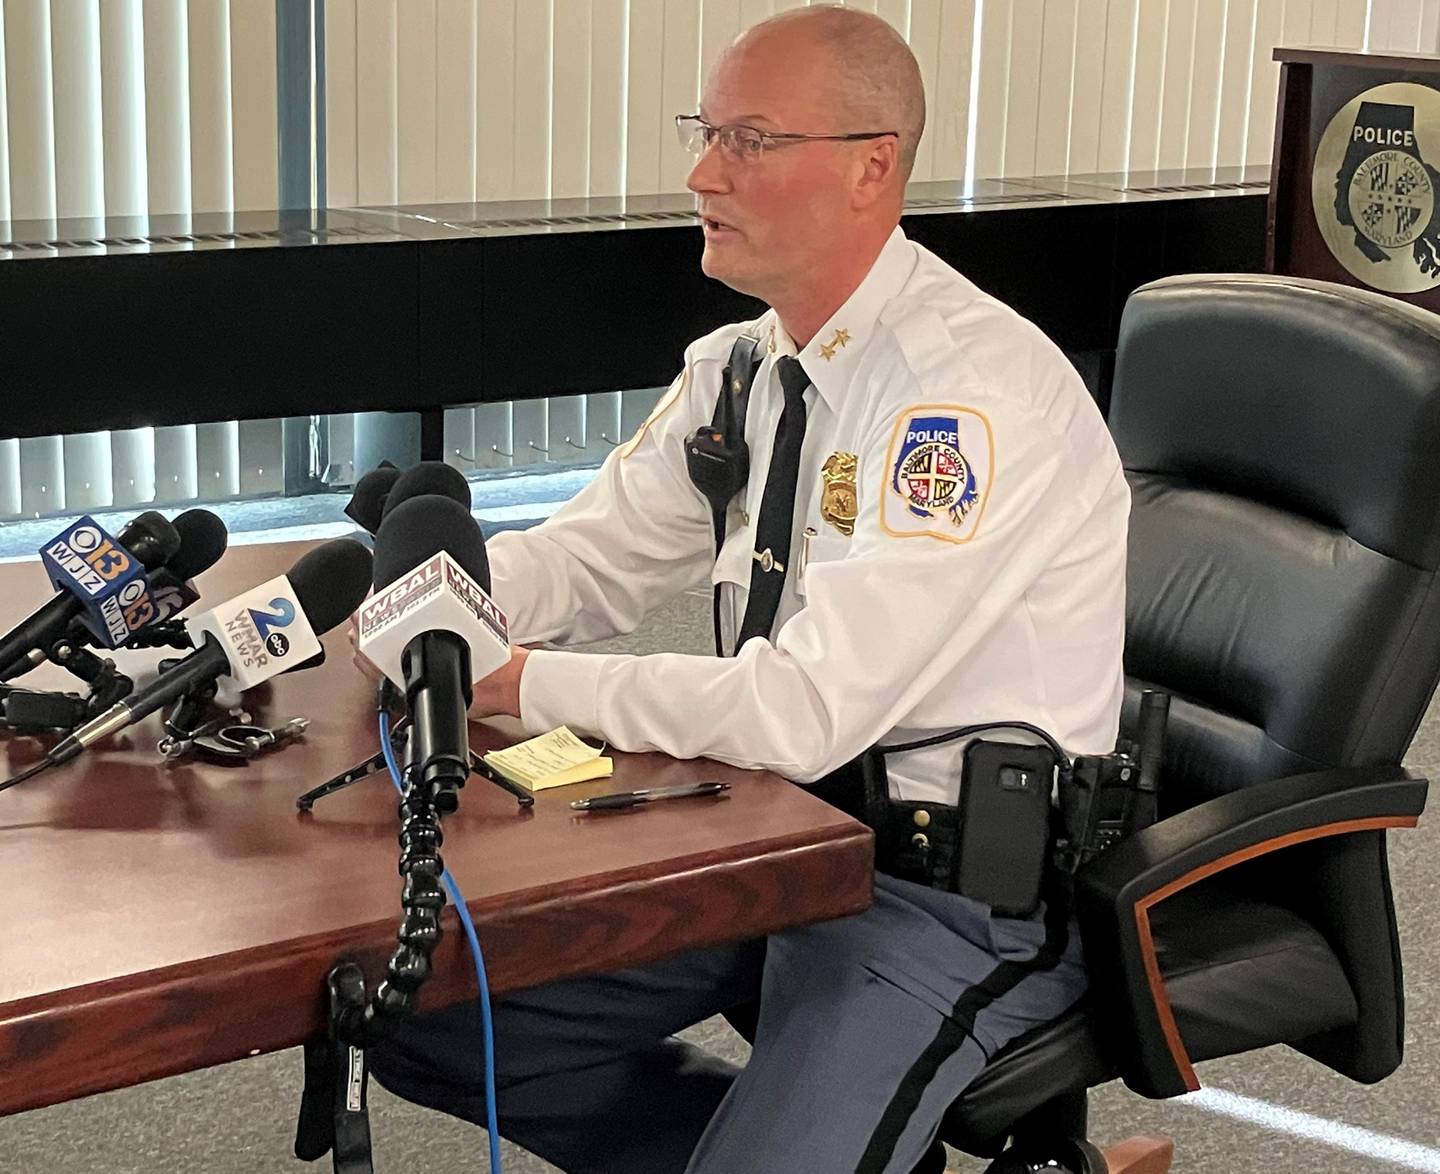 Dennis Delp, interim police chief for Baltimore County, sits at a table. Several microphones are placed on the table and point towards him.